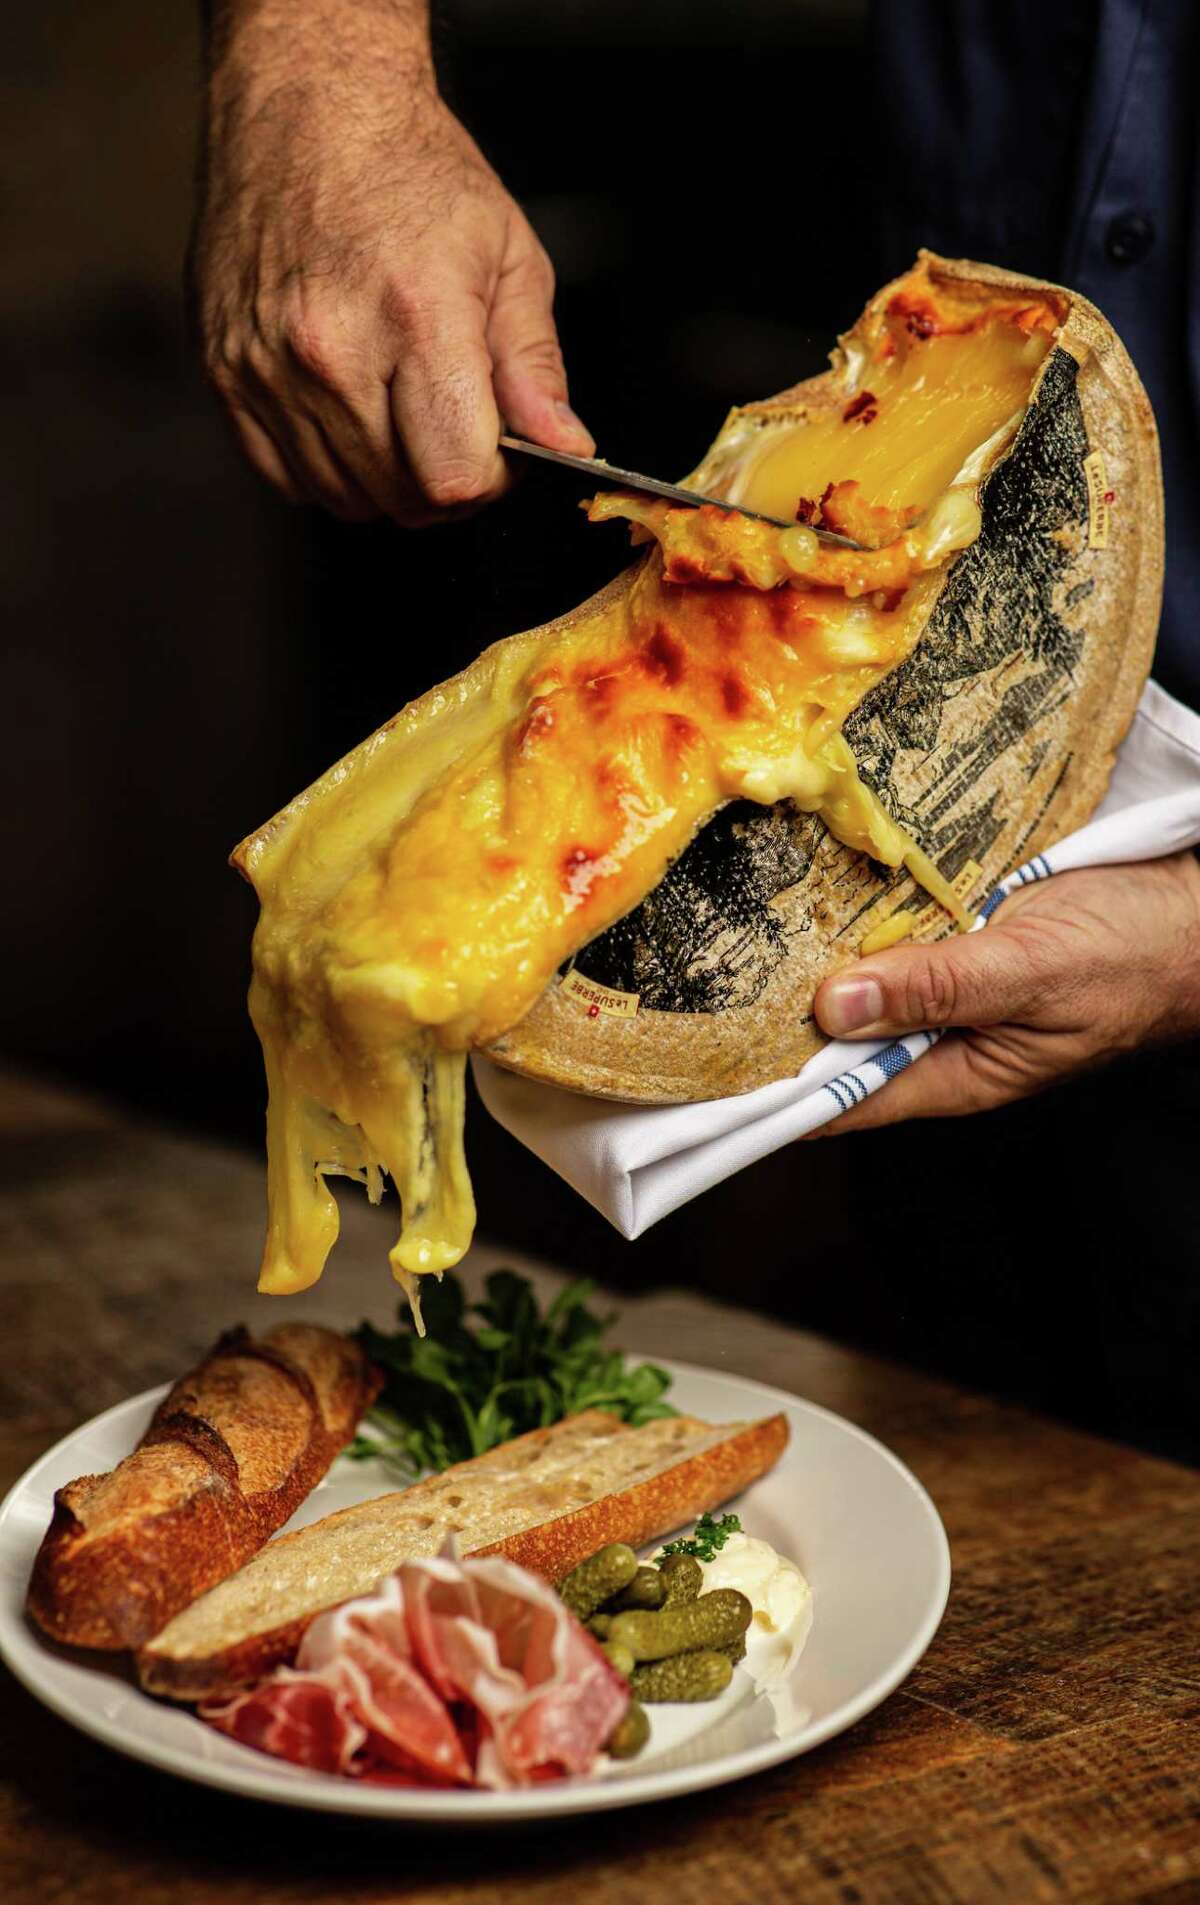 Raclette cheese as served at Brasserie Mon Chou Chou